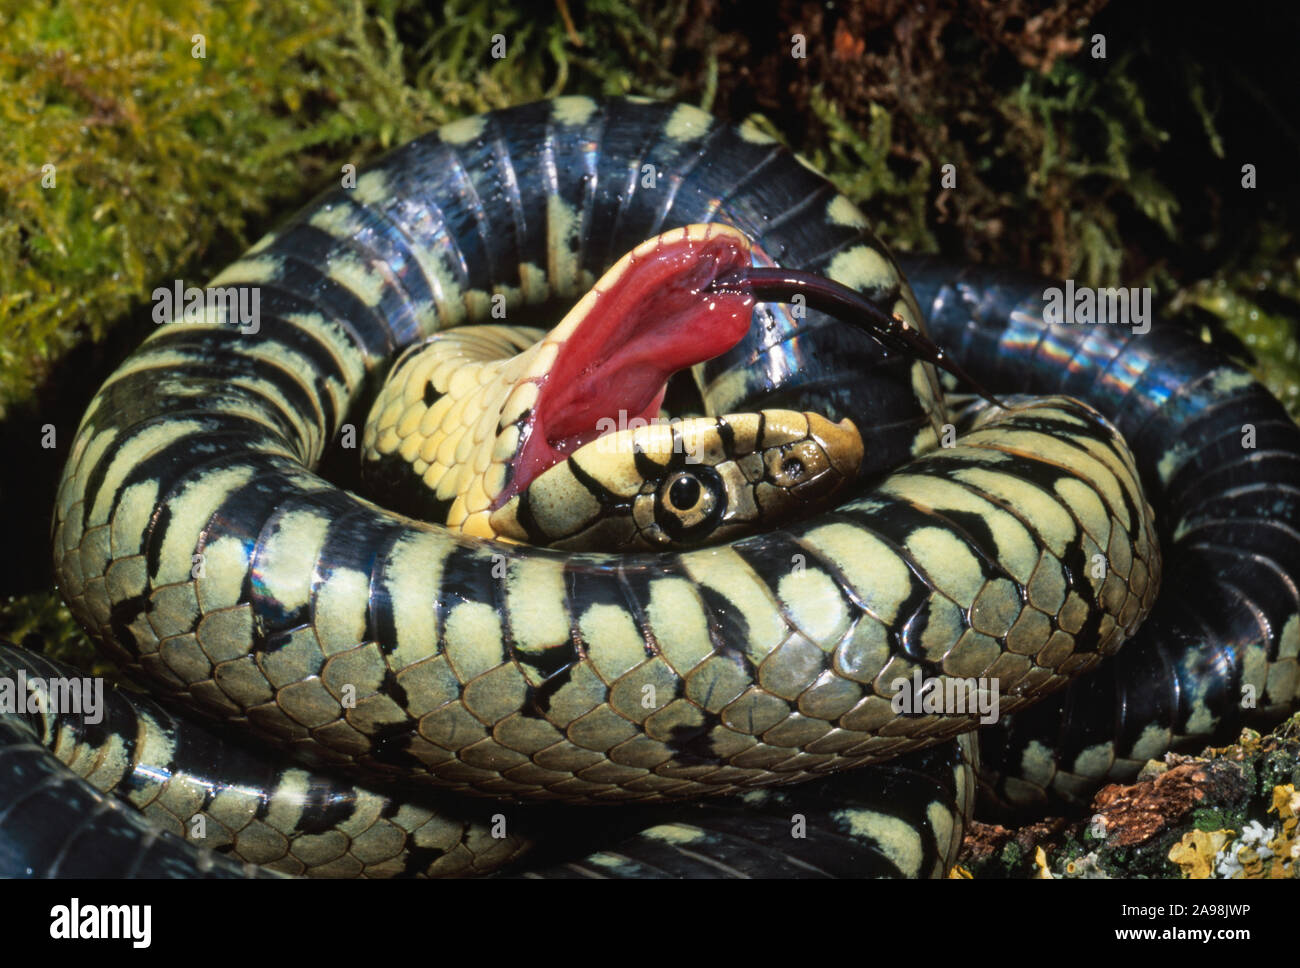 GRASS SNAKE (Natrix natrix). Behaviour, posture, Slow writhing, contorted, contortion, over turning, mouth open, tongue extended, feigning dead. Stock Photo